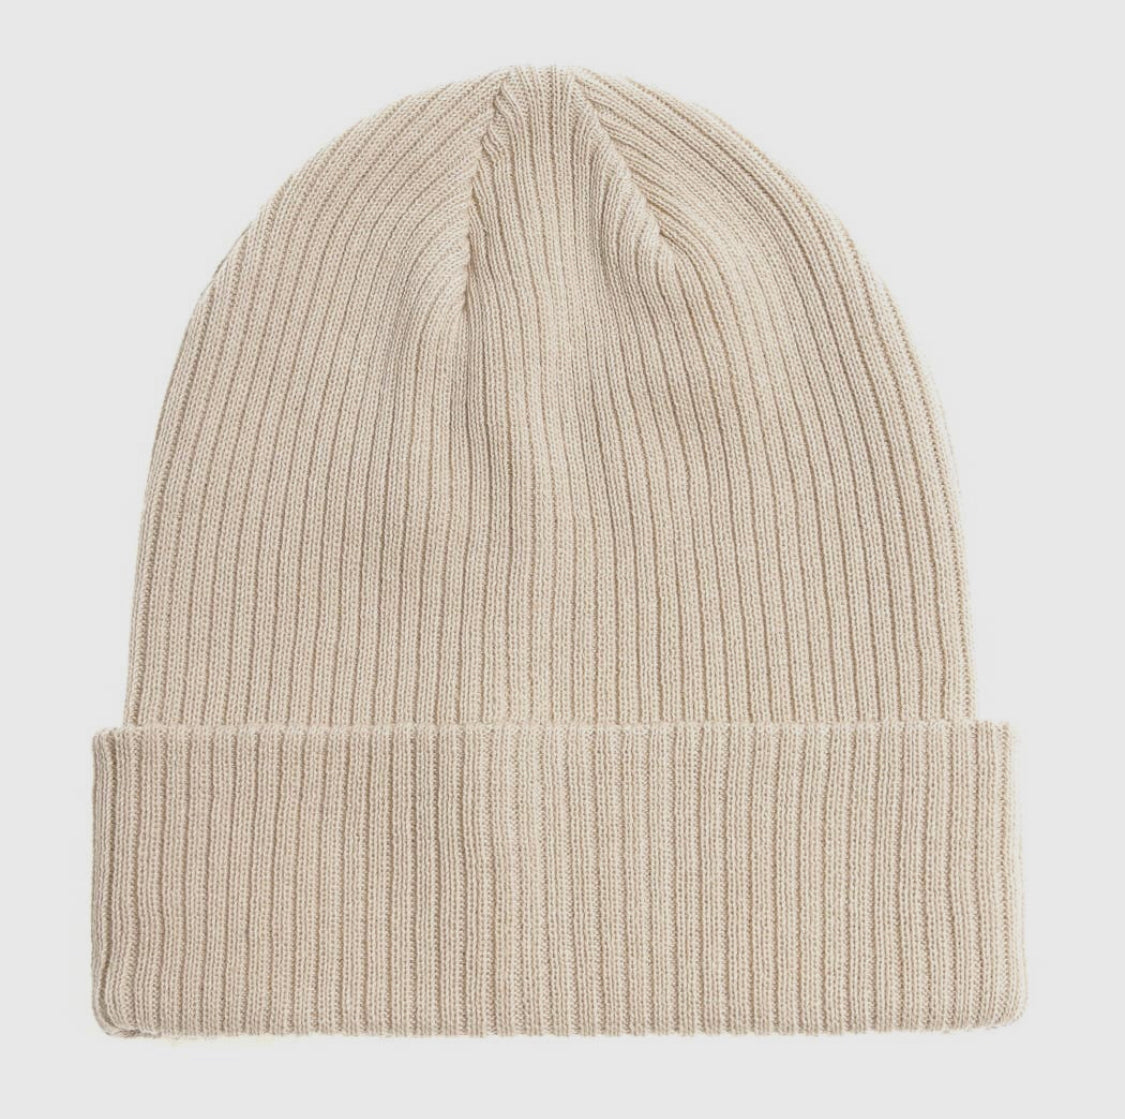 Cotton Knitted Beanies